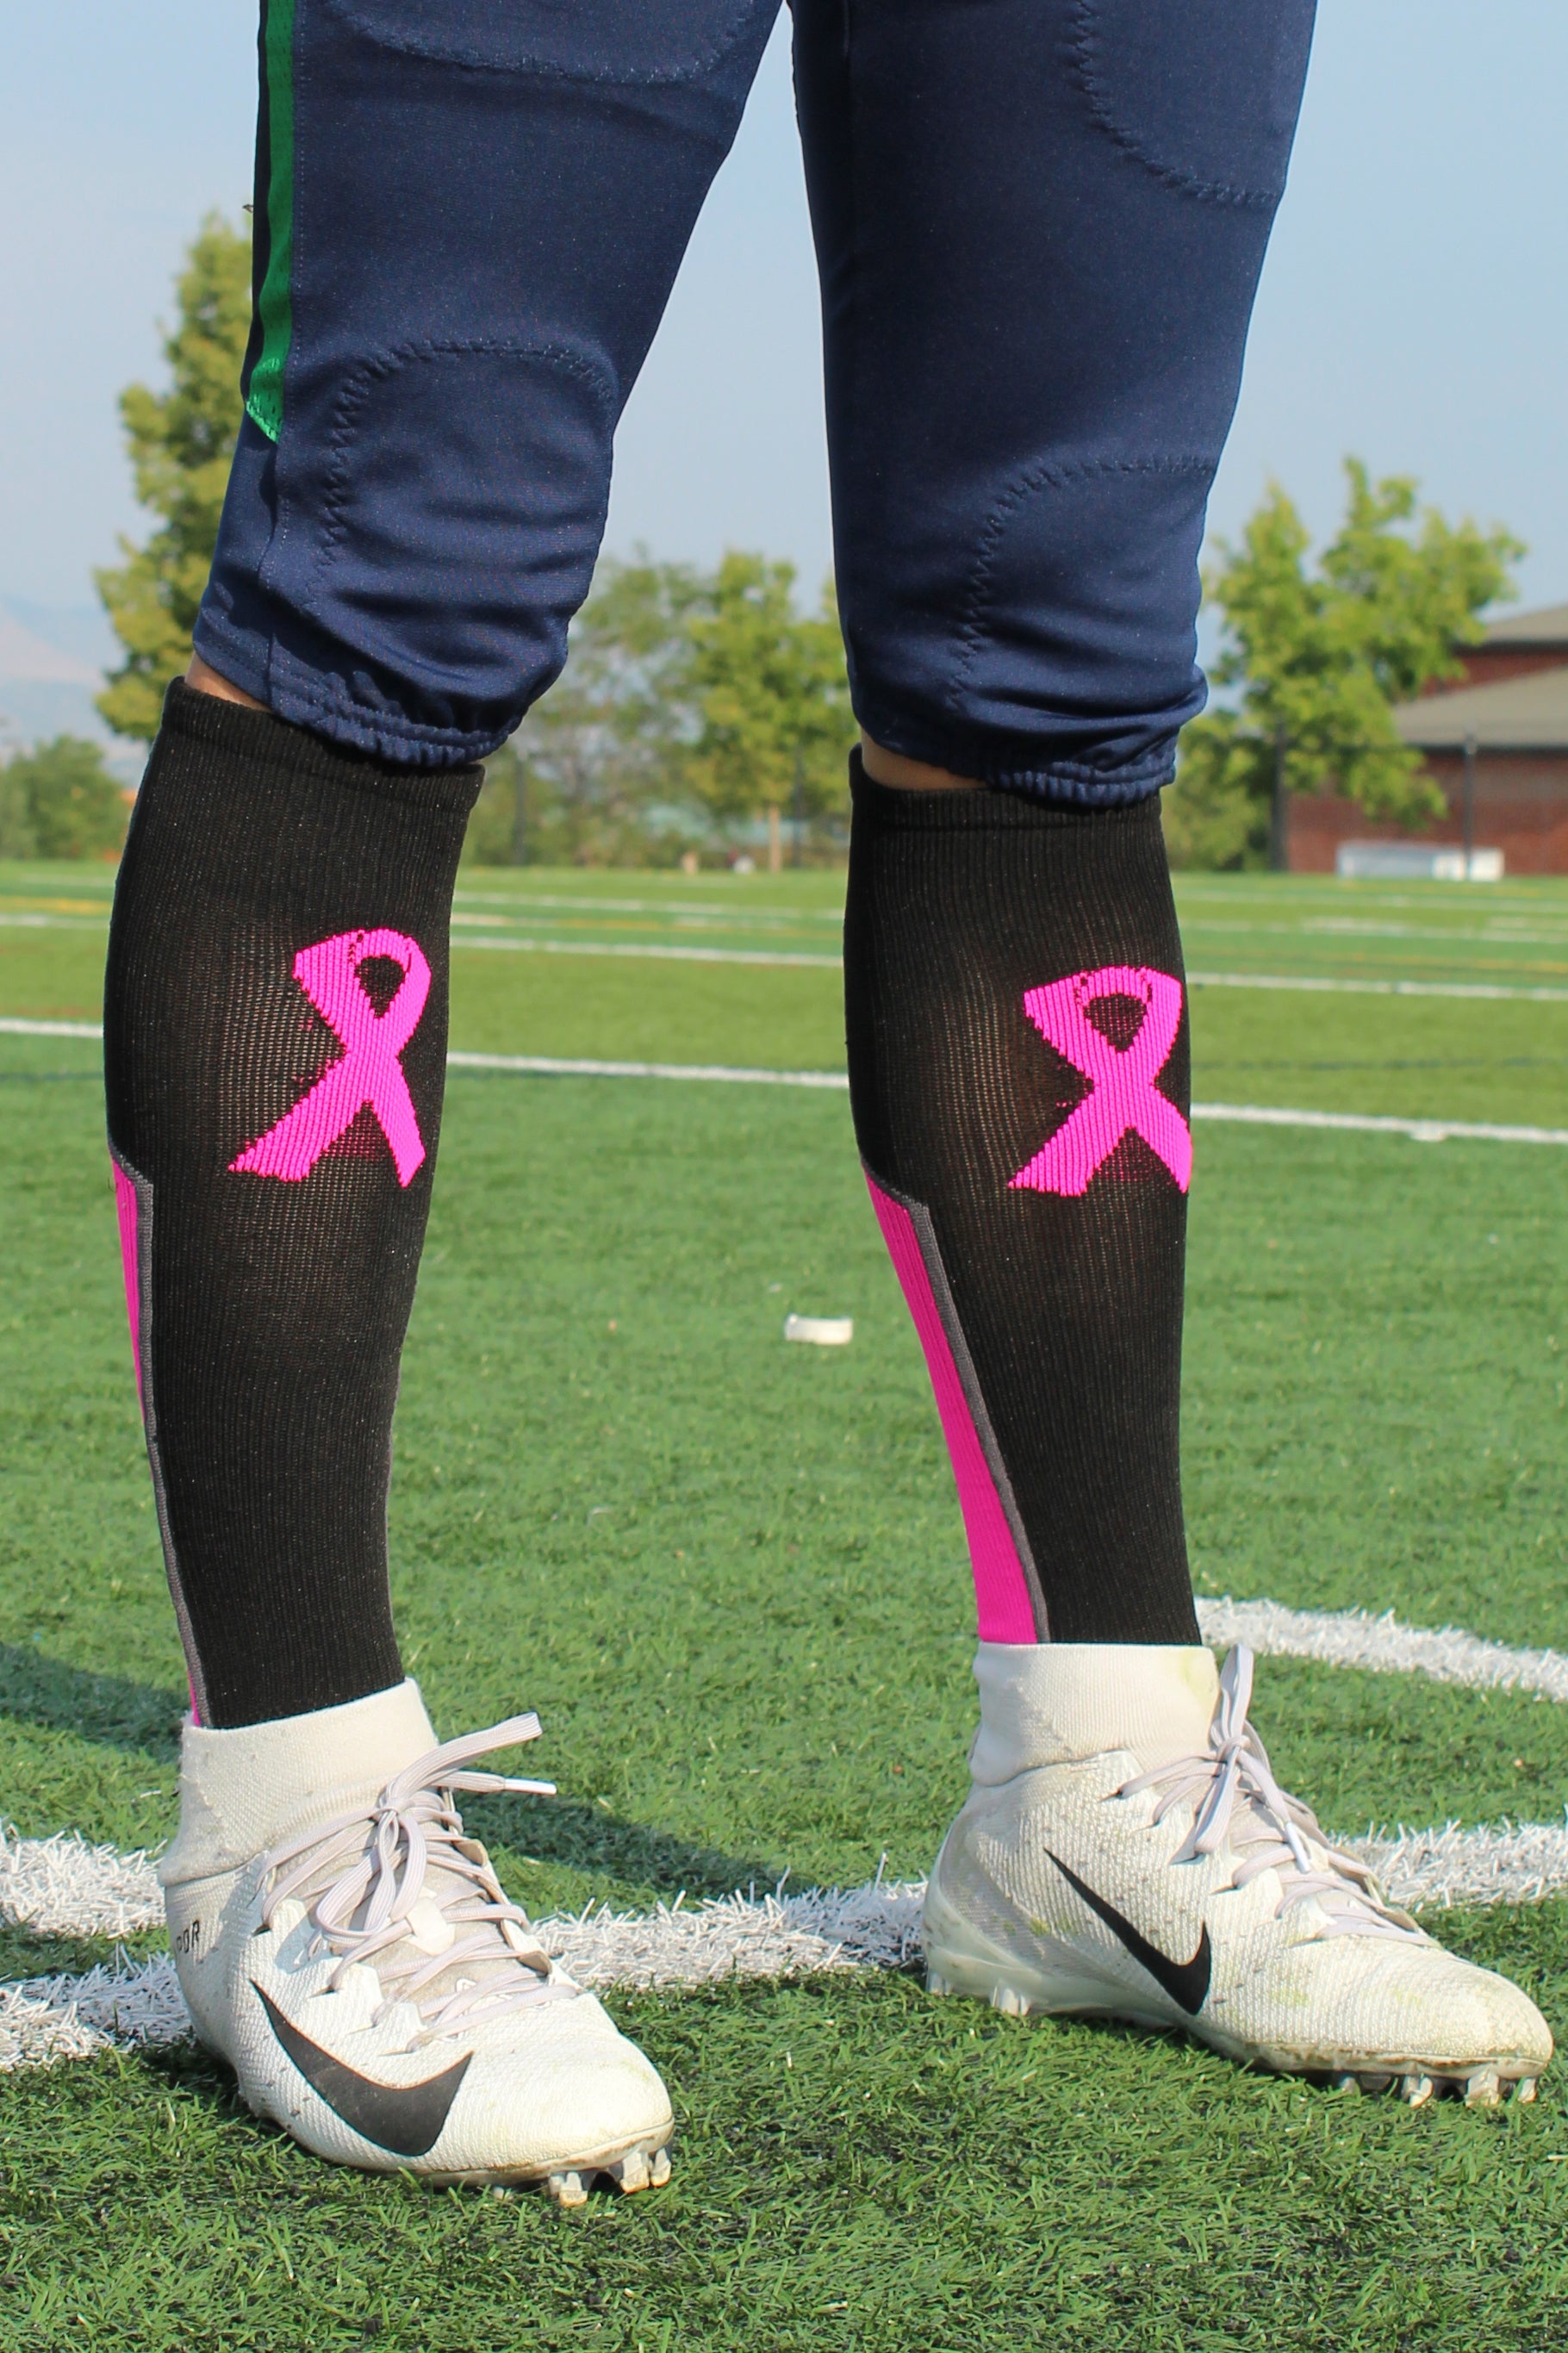 History of Breast Cancer Awareness in Sports